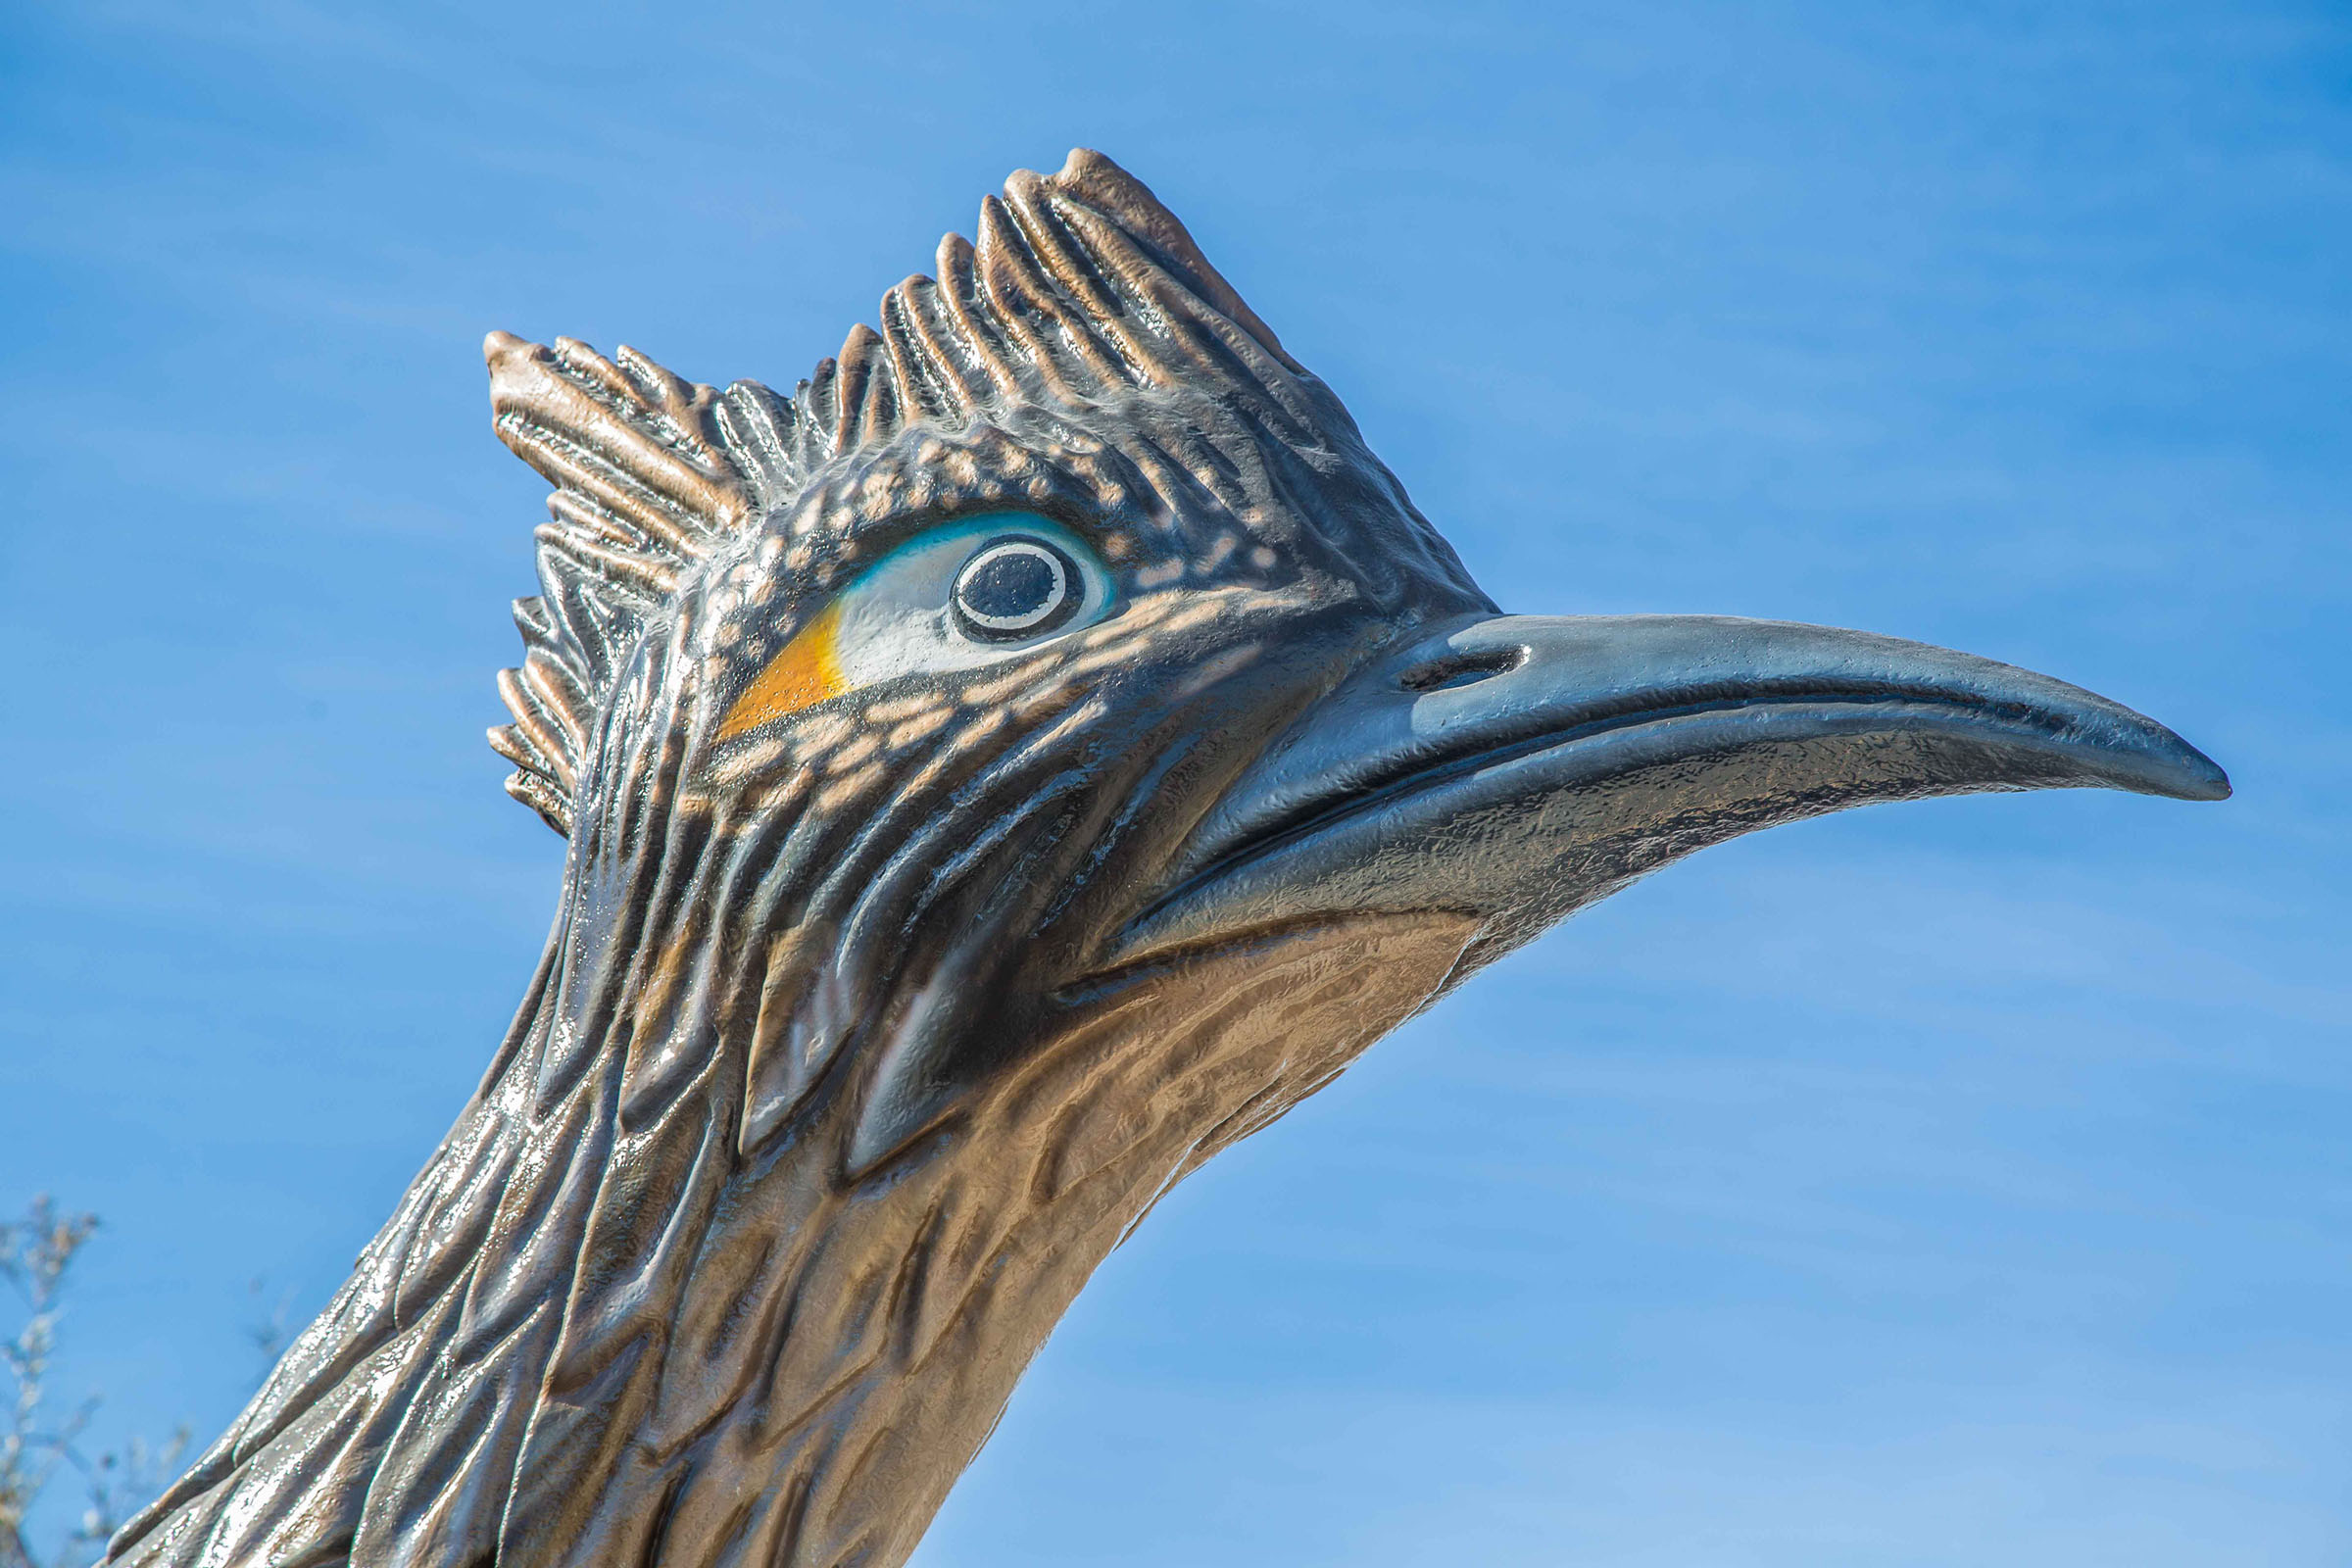 A close-up of the head of a statue of a bird.